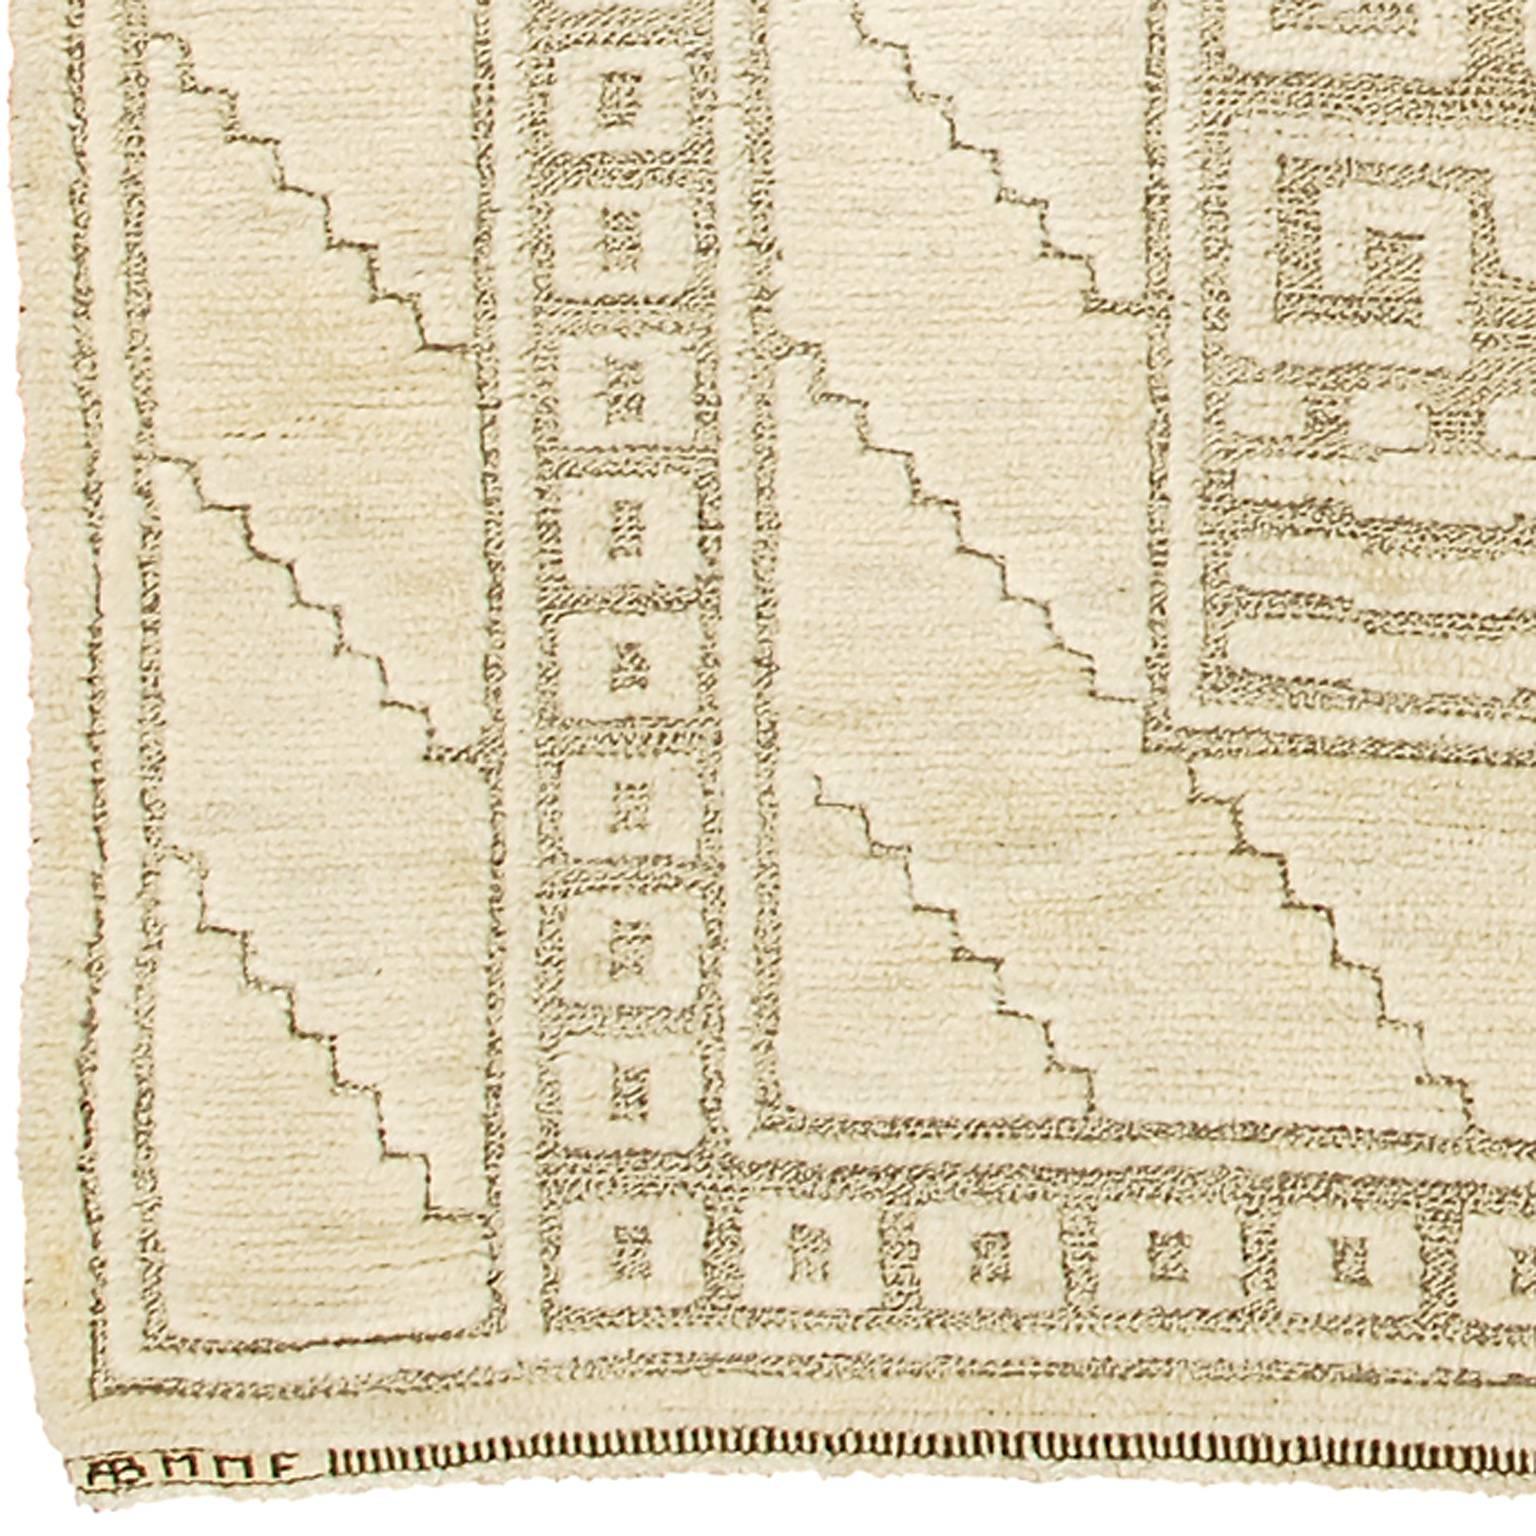 Mid-20th Century Swedish Pile and Flat-Weave Carpet
Initialed: AB MMF MH (AB Märta Måås-Fjetterström, Marin Hemmingsson).
Sweden, circa 1943.
100% wool on linen foundation.

This vintage Scandinavian rug evidence Marta Maas-Fjetterström